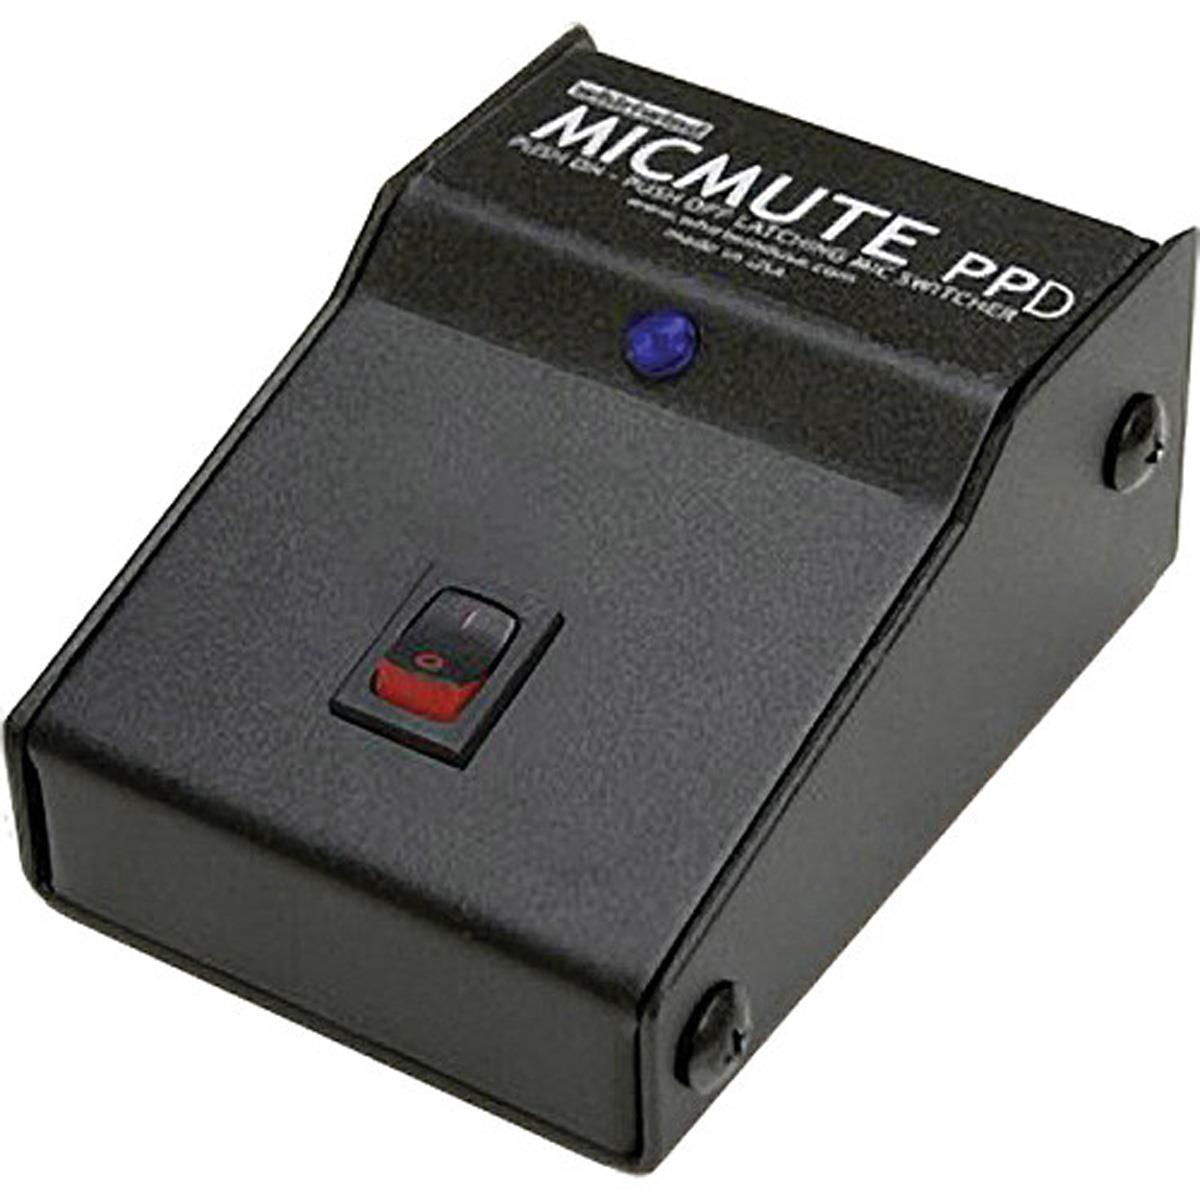 Image of Whirlwind Micmute PPD Latching Switch-On/Switch-Off Desktop Design Audio Switch